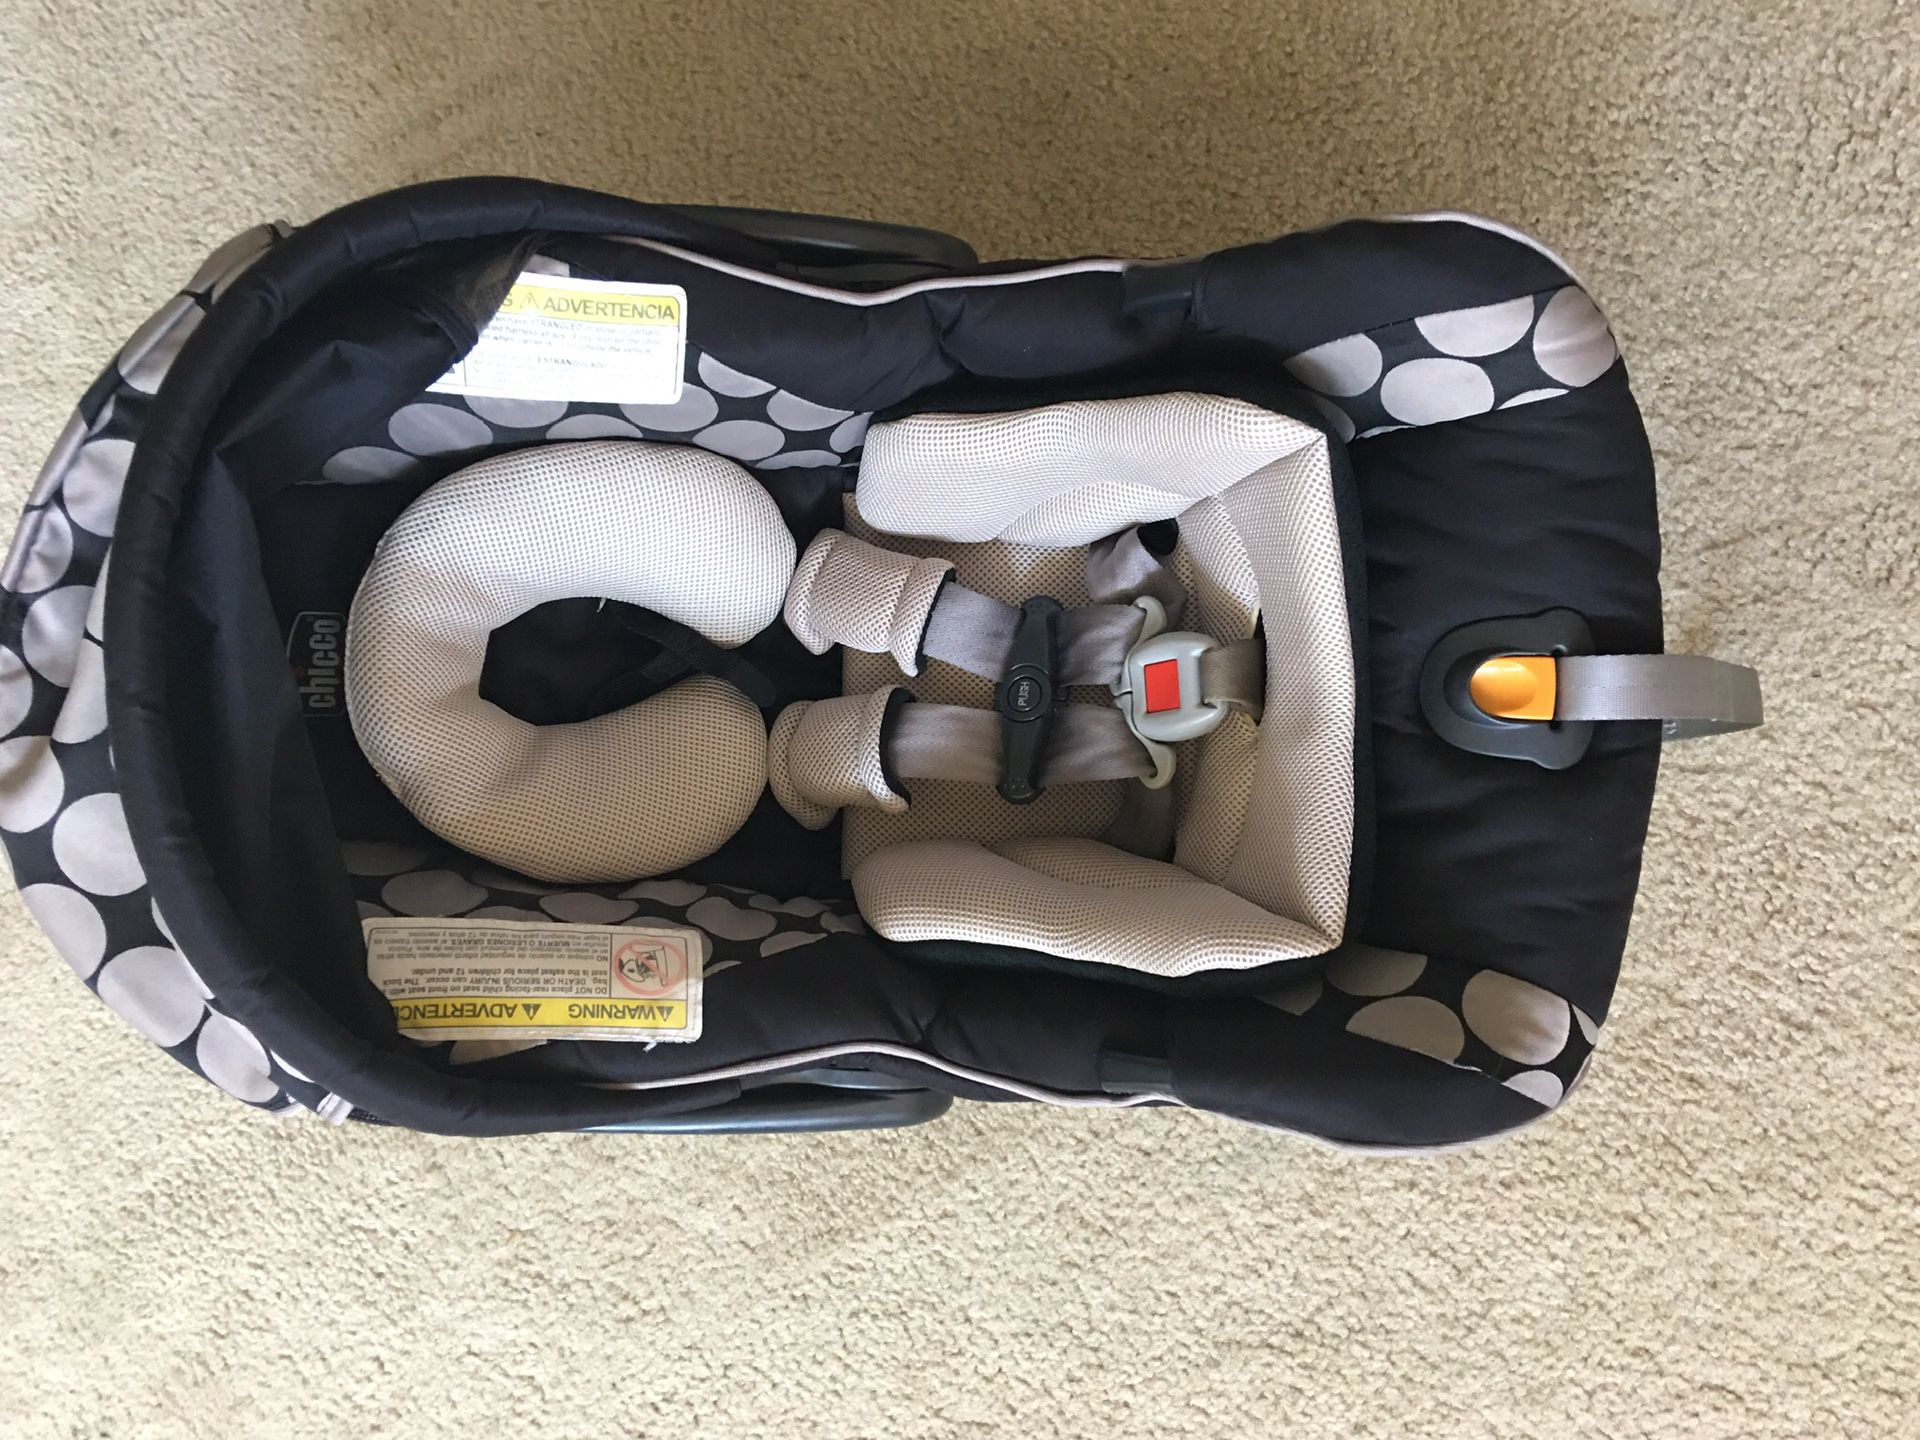 Chicco KeyFit 30 Infant Car Seat with extra base and winter cover